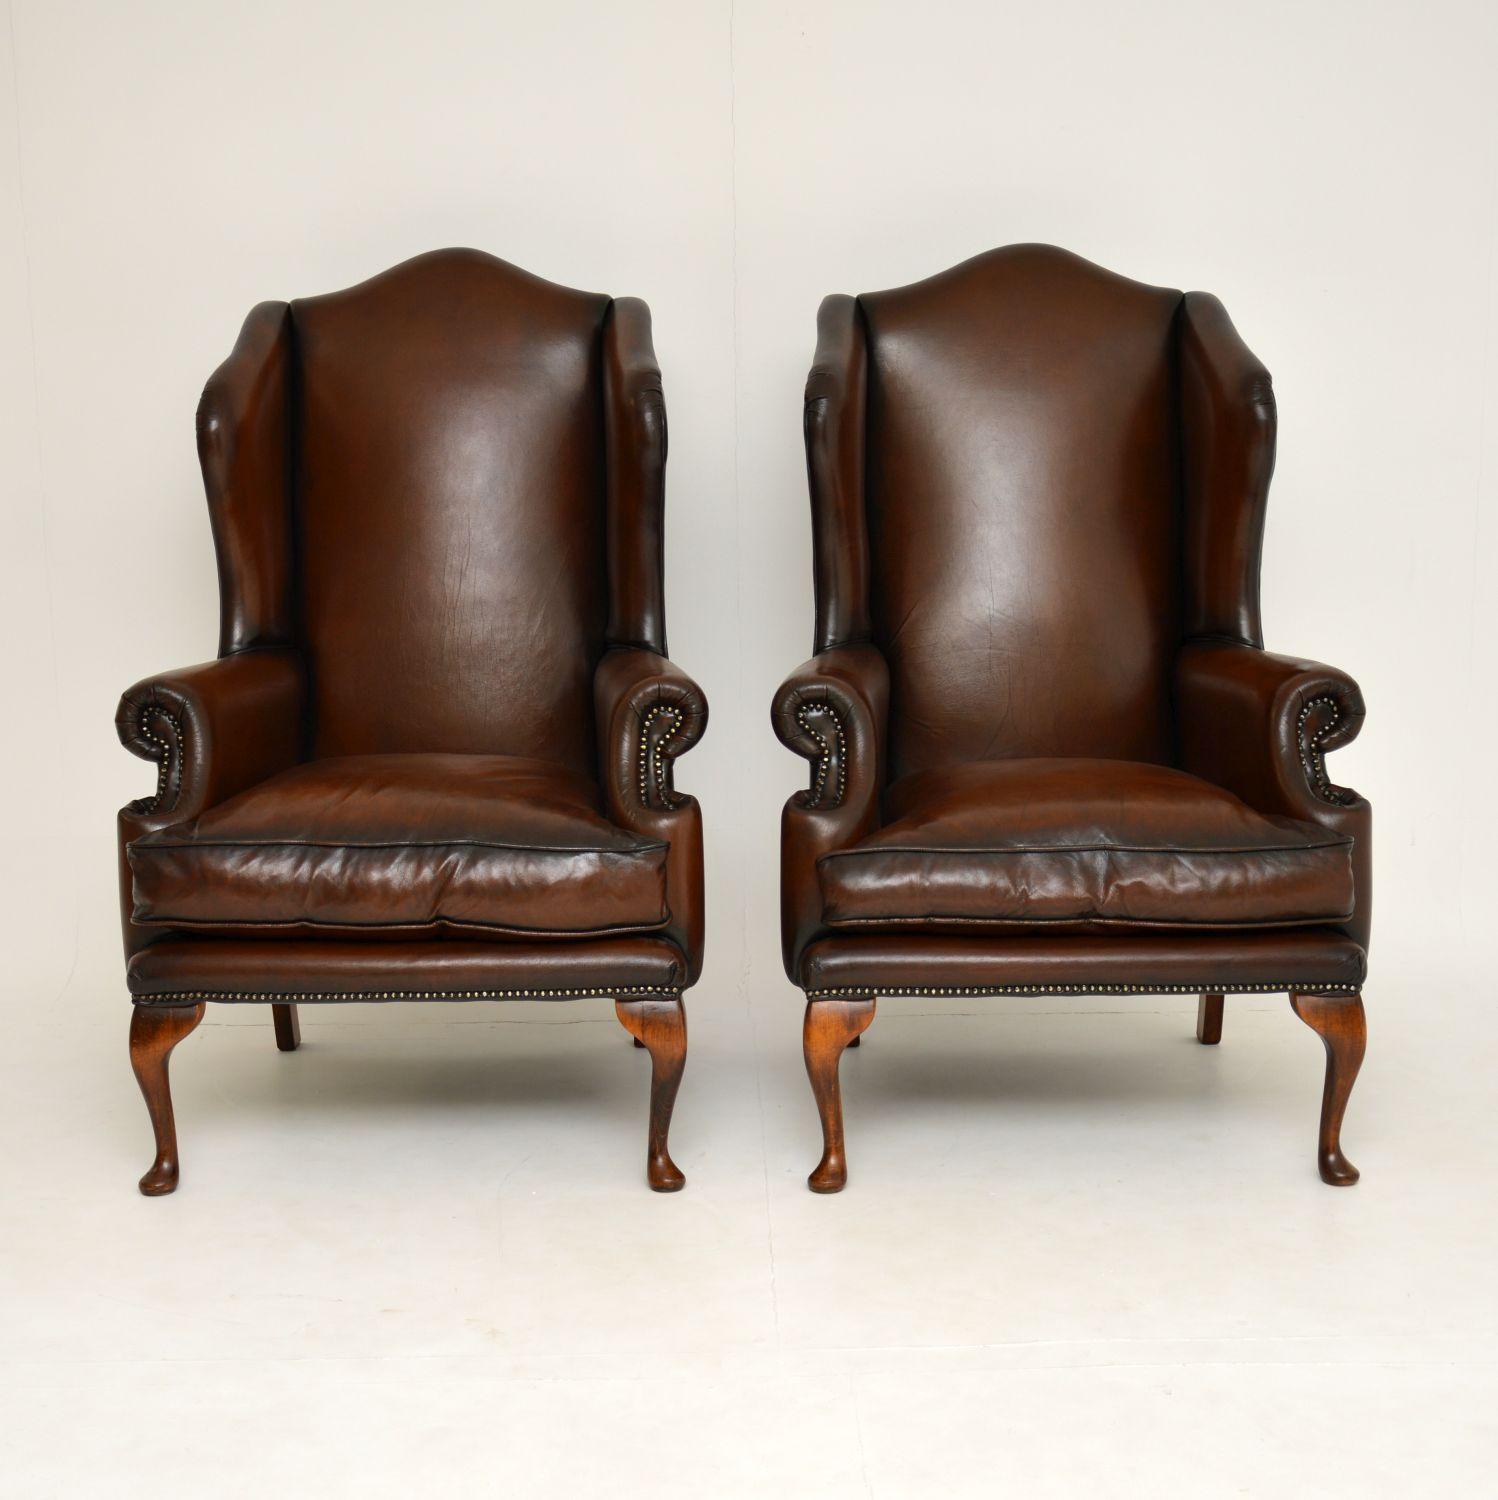 A beautiful and extremely comfortable pair of leather wingback armchairs in the antique Georgian style.

These date from circa 1950s-1960s, they are of excellent quality and have a strong, yet elegant look. They have hump backs, scrolled arms, and